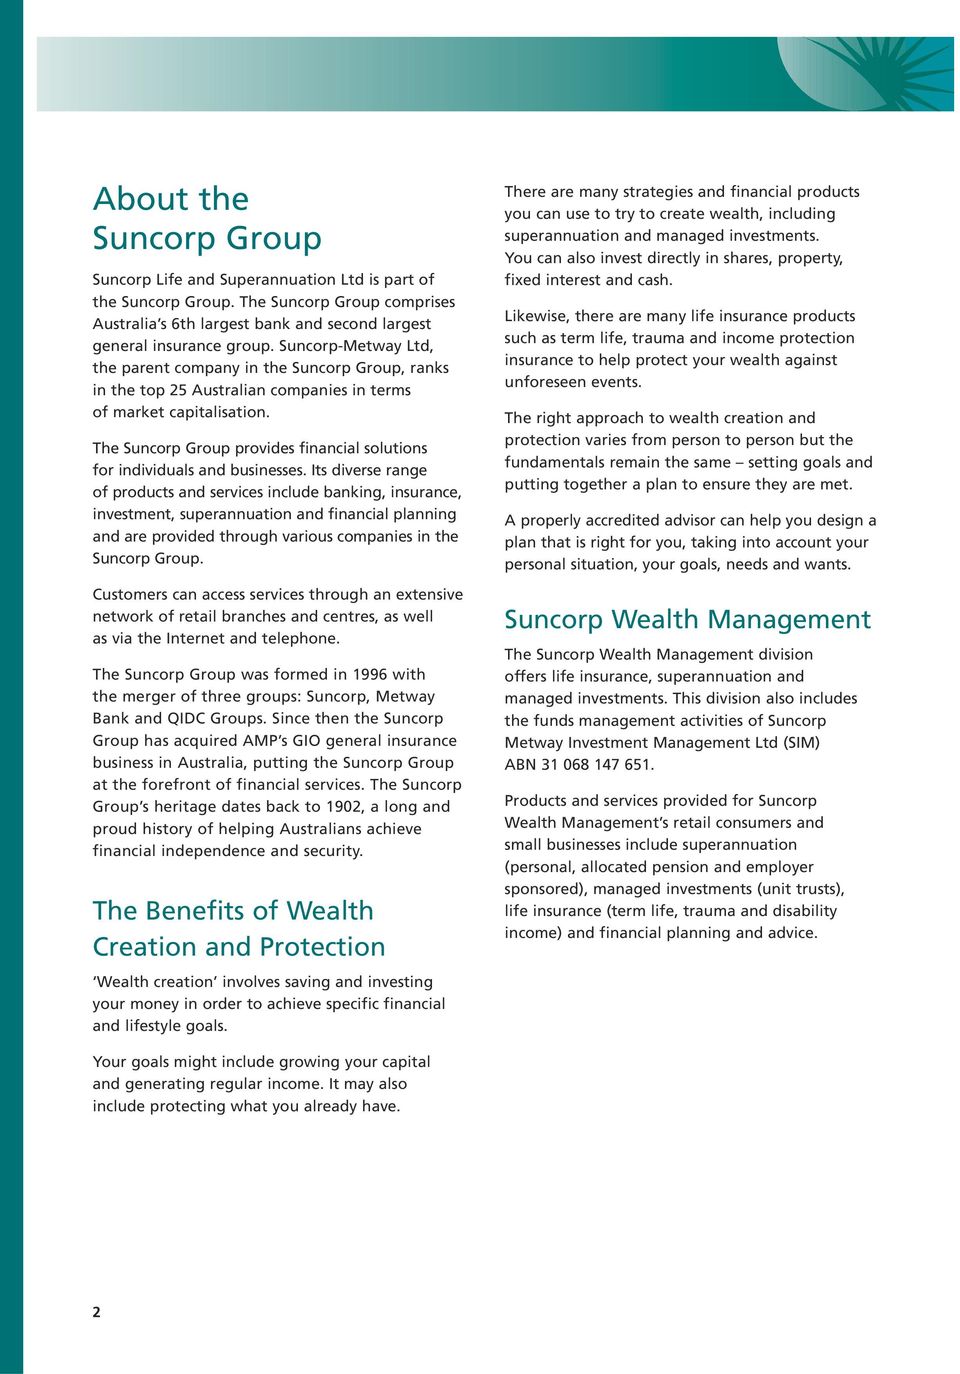 The Suncorp Group provides financial solutions for individuals and businesses.